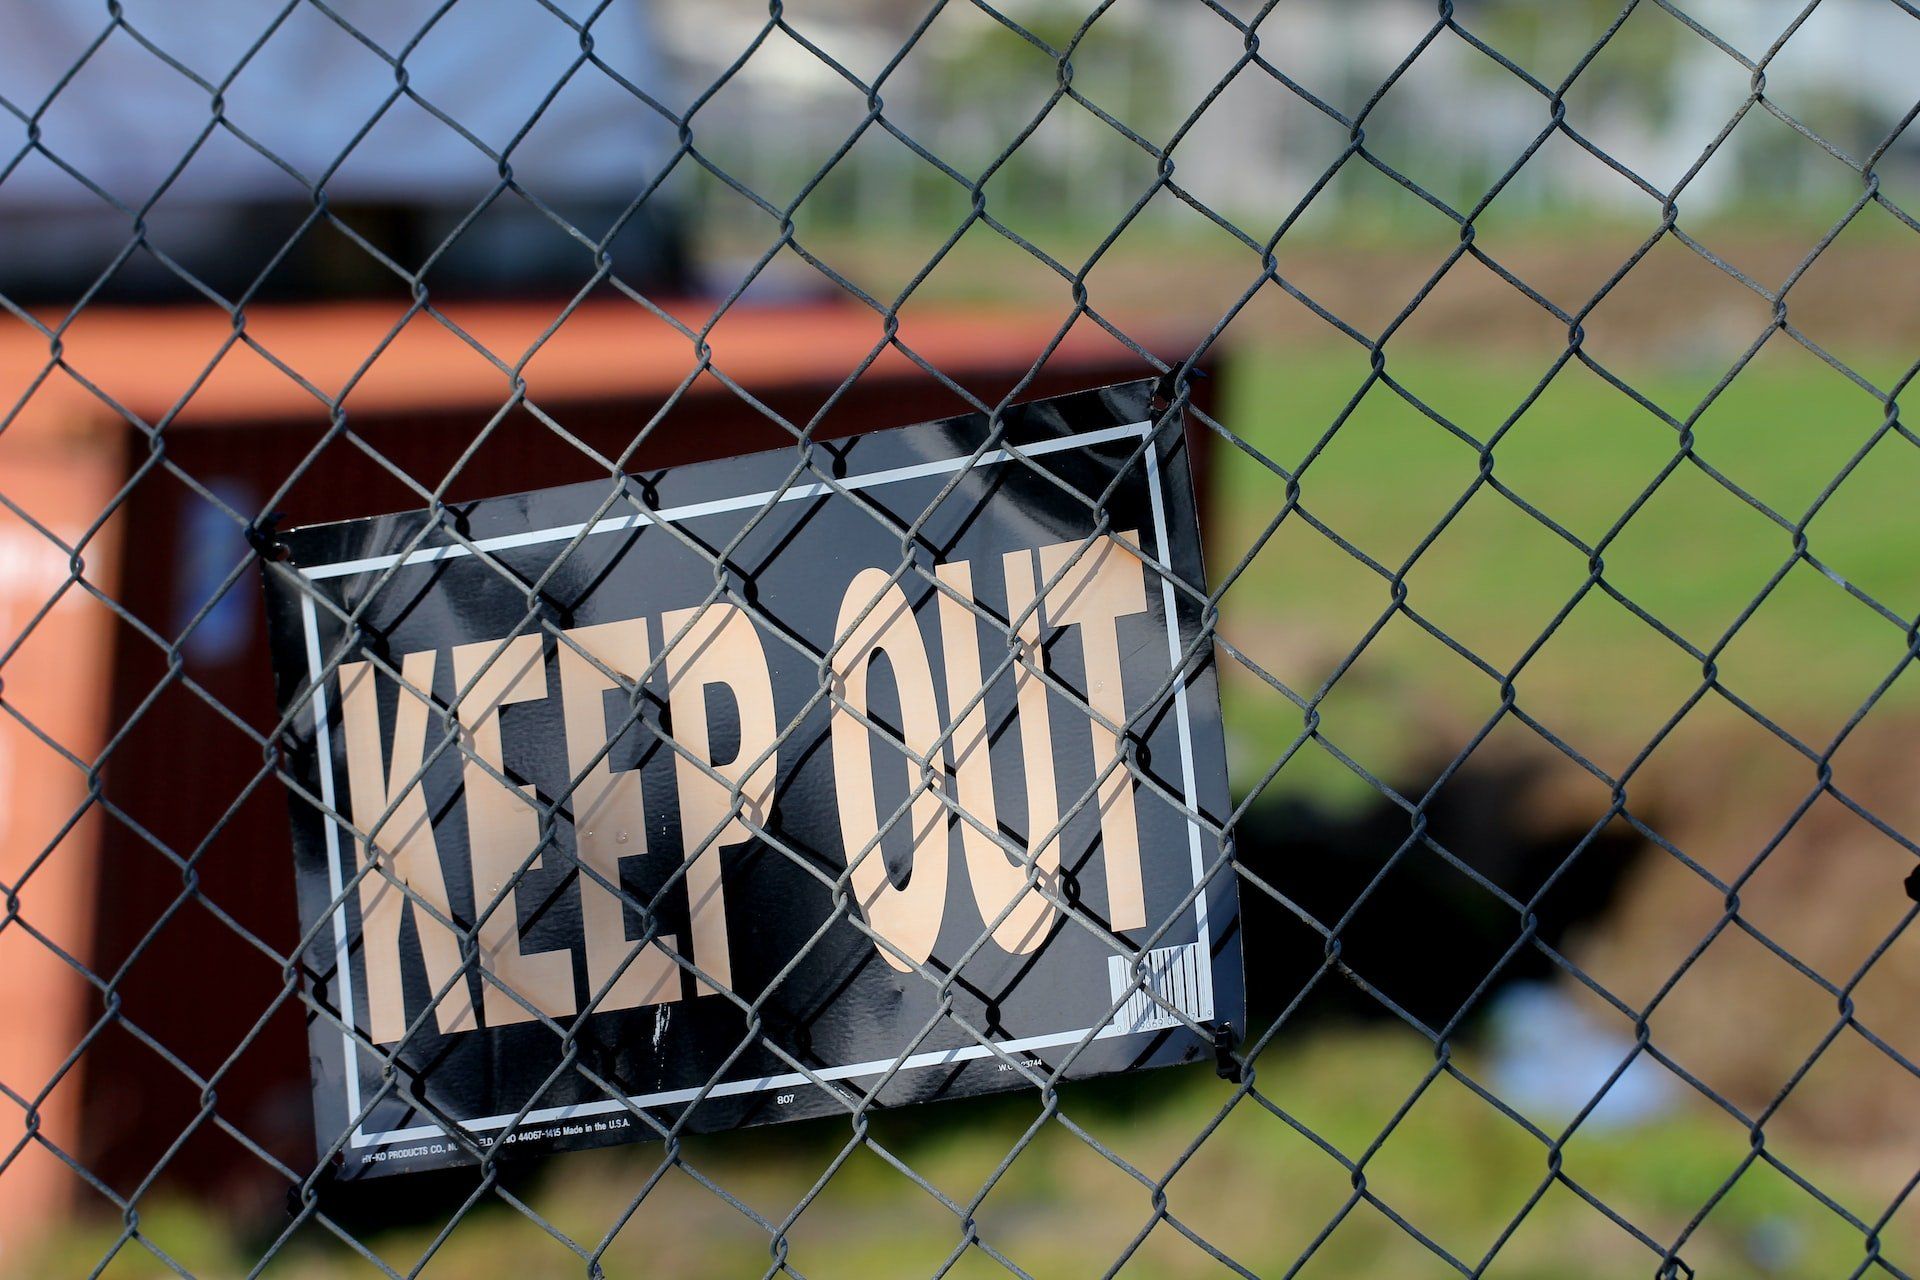 Image of a Keep Out sign on a fence